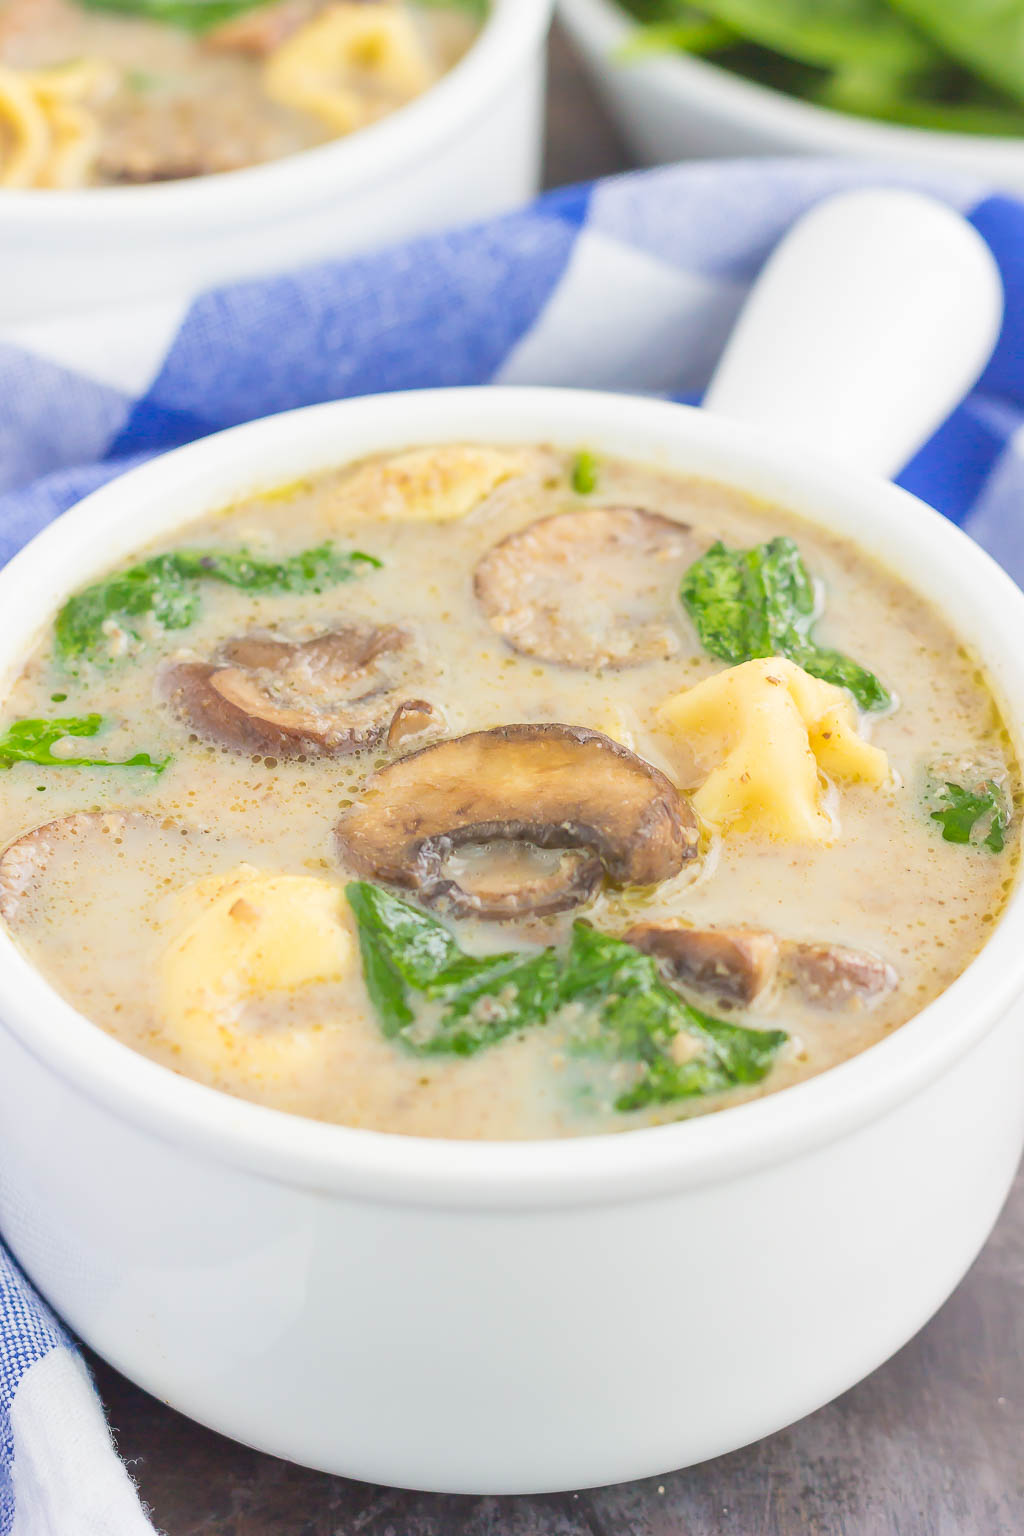 This Creamy Mushroom and Spinach Tortellini Soup is made in one pot and ready in just 30 minutes. Packed with fresh mushrooms, cheese tortellini, and baby spinach, this soup is creamy, comforting, and will warm you right up! #soup #souprecipe #mushroomsoup #creamymushroomsoup #tortellinisoup #mushroomspinachsoup #mushroomtortellinisoup #dinner #comfortfood